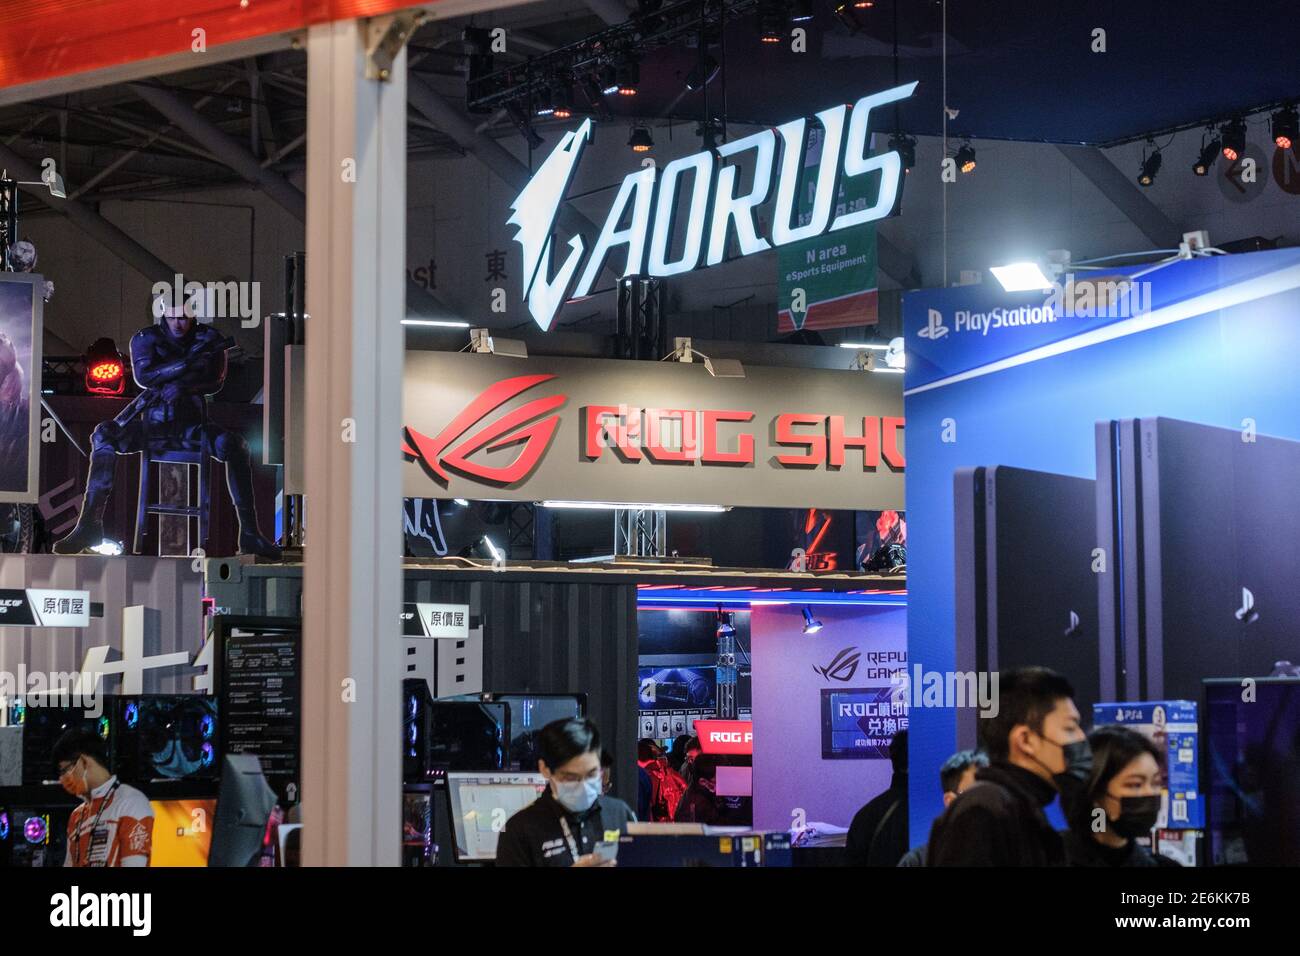 View of ROG (Republic of Gamers) and AORUS stands during the Taipei Game Show at Nangang Exhibition Center in Taipei.Taipei Game Show, held by Taipei Computer Association (TCA), is the only game exhibition, which combines B2B and B2C zone. From 2003, it attracts tons of gamers from all over the world because of the special and amazing content. B2B ZONE divides into “B2B ZONE” and “Indie House”. The former one focuses on game developers, publishers, third-party payment and advertisers, the latter one gathers global indie teams to share and merchandise their game IPs. Also, B2B ZONE set up an on Stock Photo